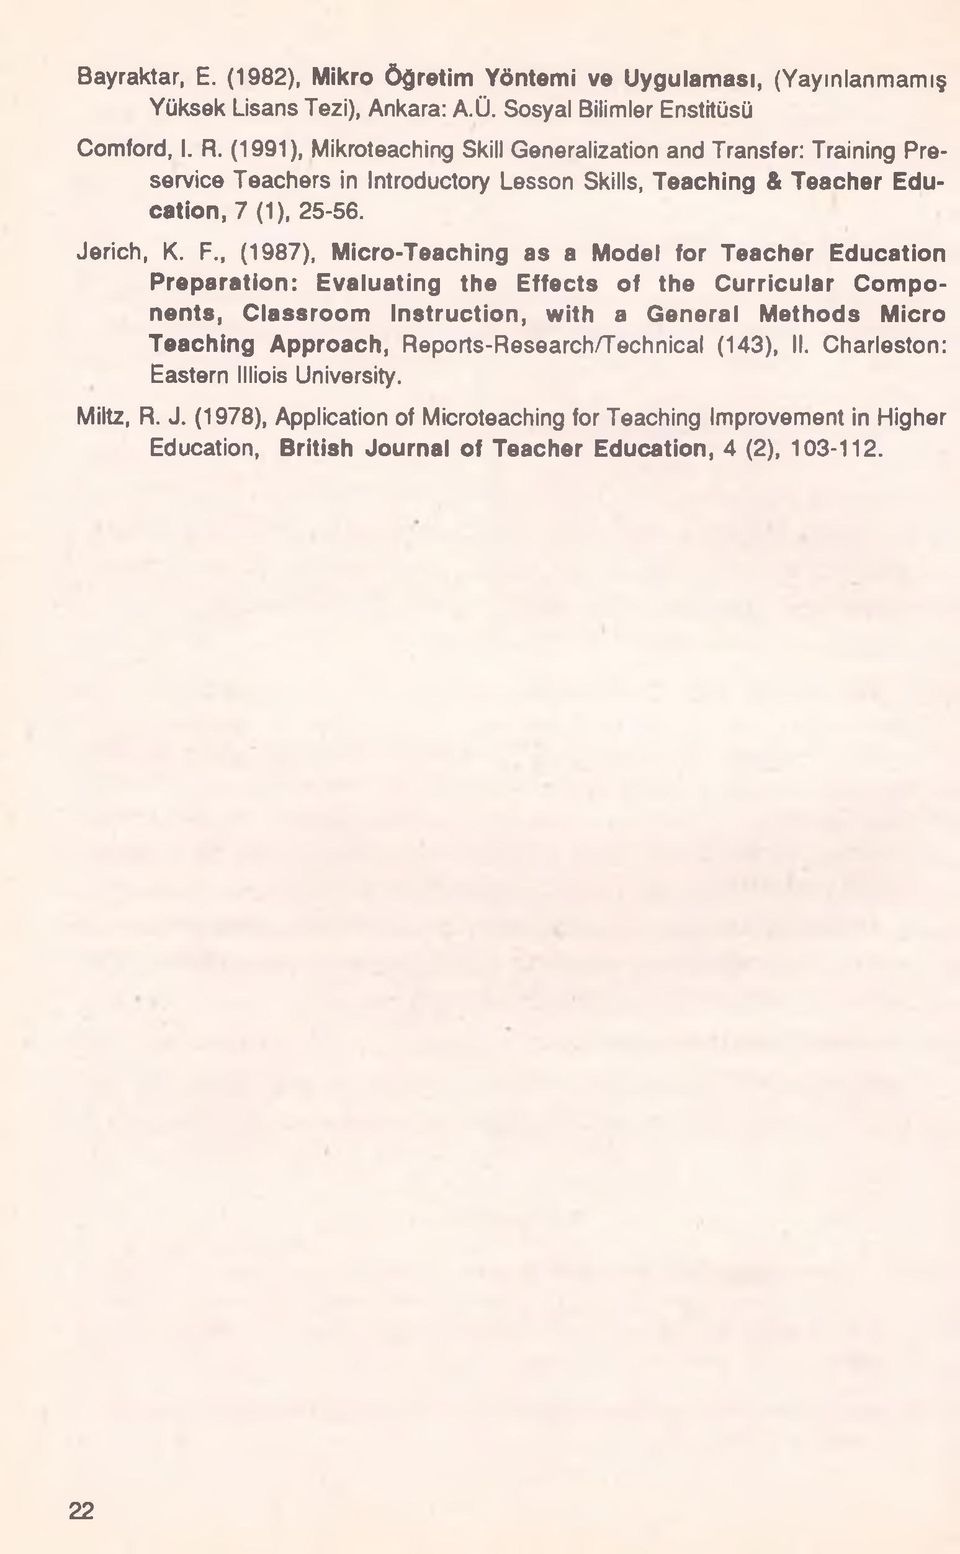 , (1987), Micro-Teaching as a Model for Teacher Education Preparation: Evaluating the Effects of the Curricular Components, Classroom Instruction, with a General Methods Micro Teaching